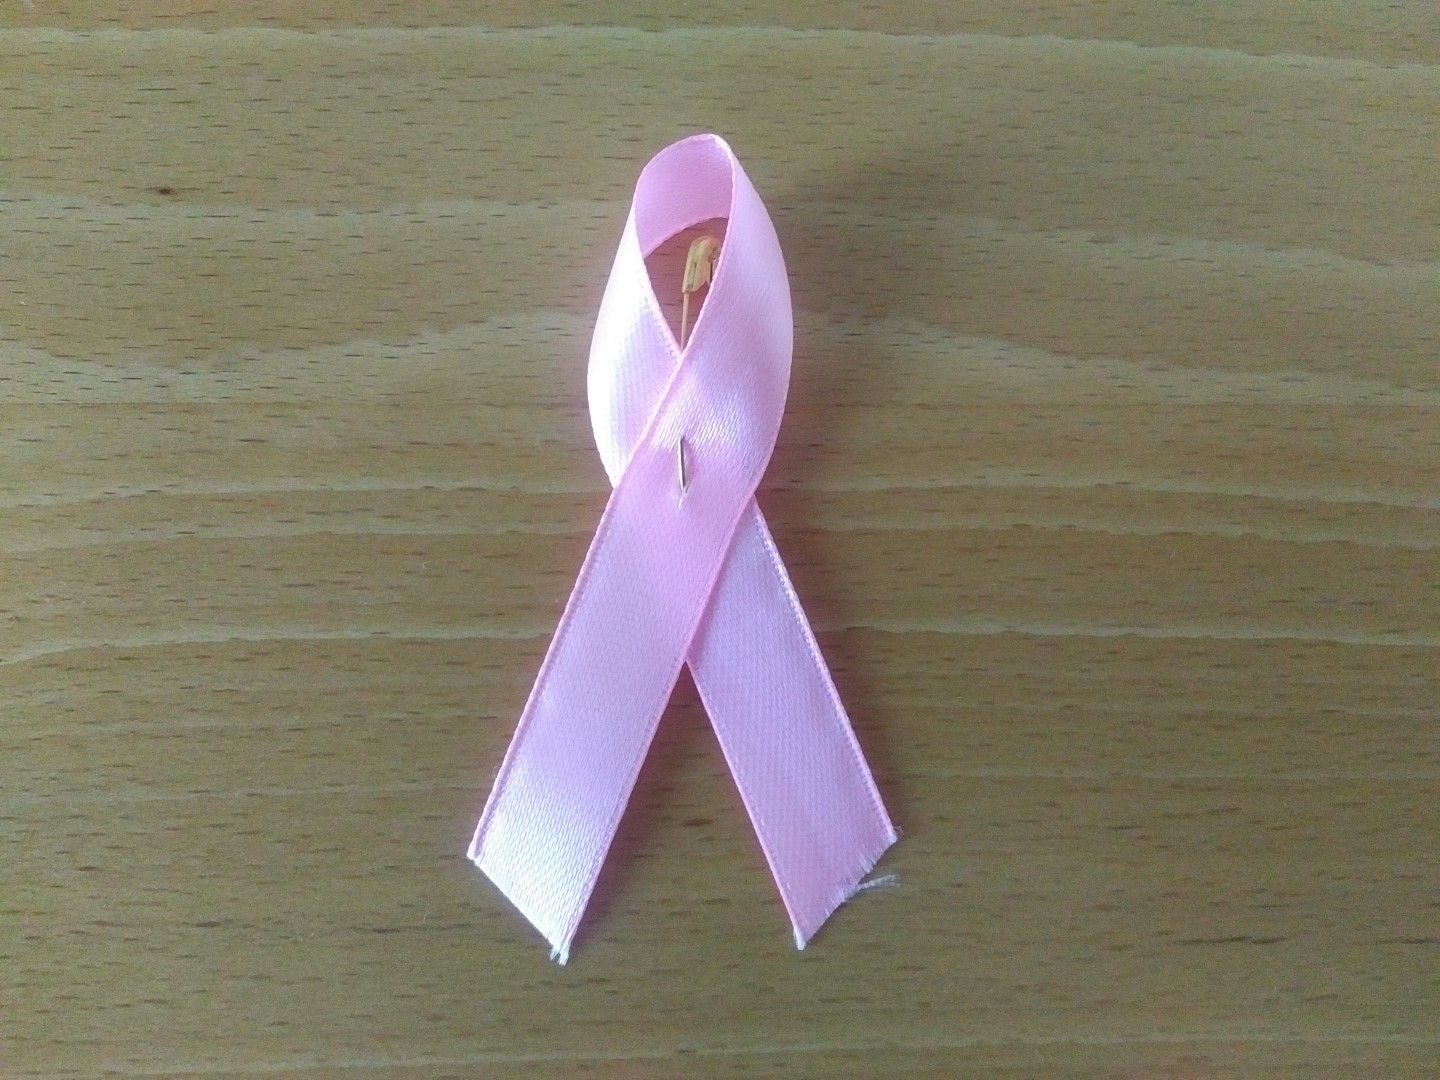 Breast Cancer Awareness for the Under 40s